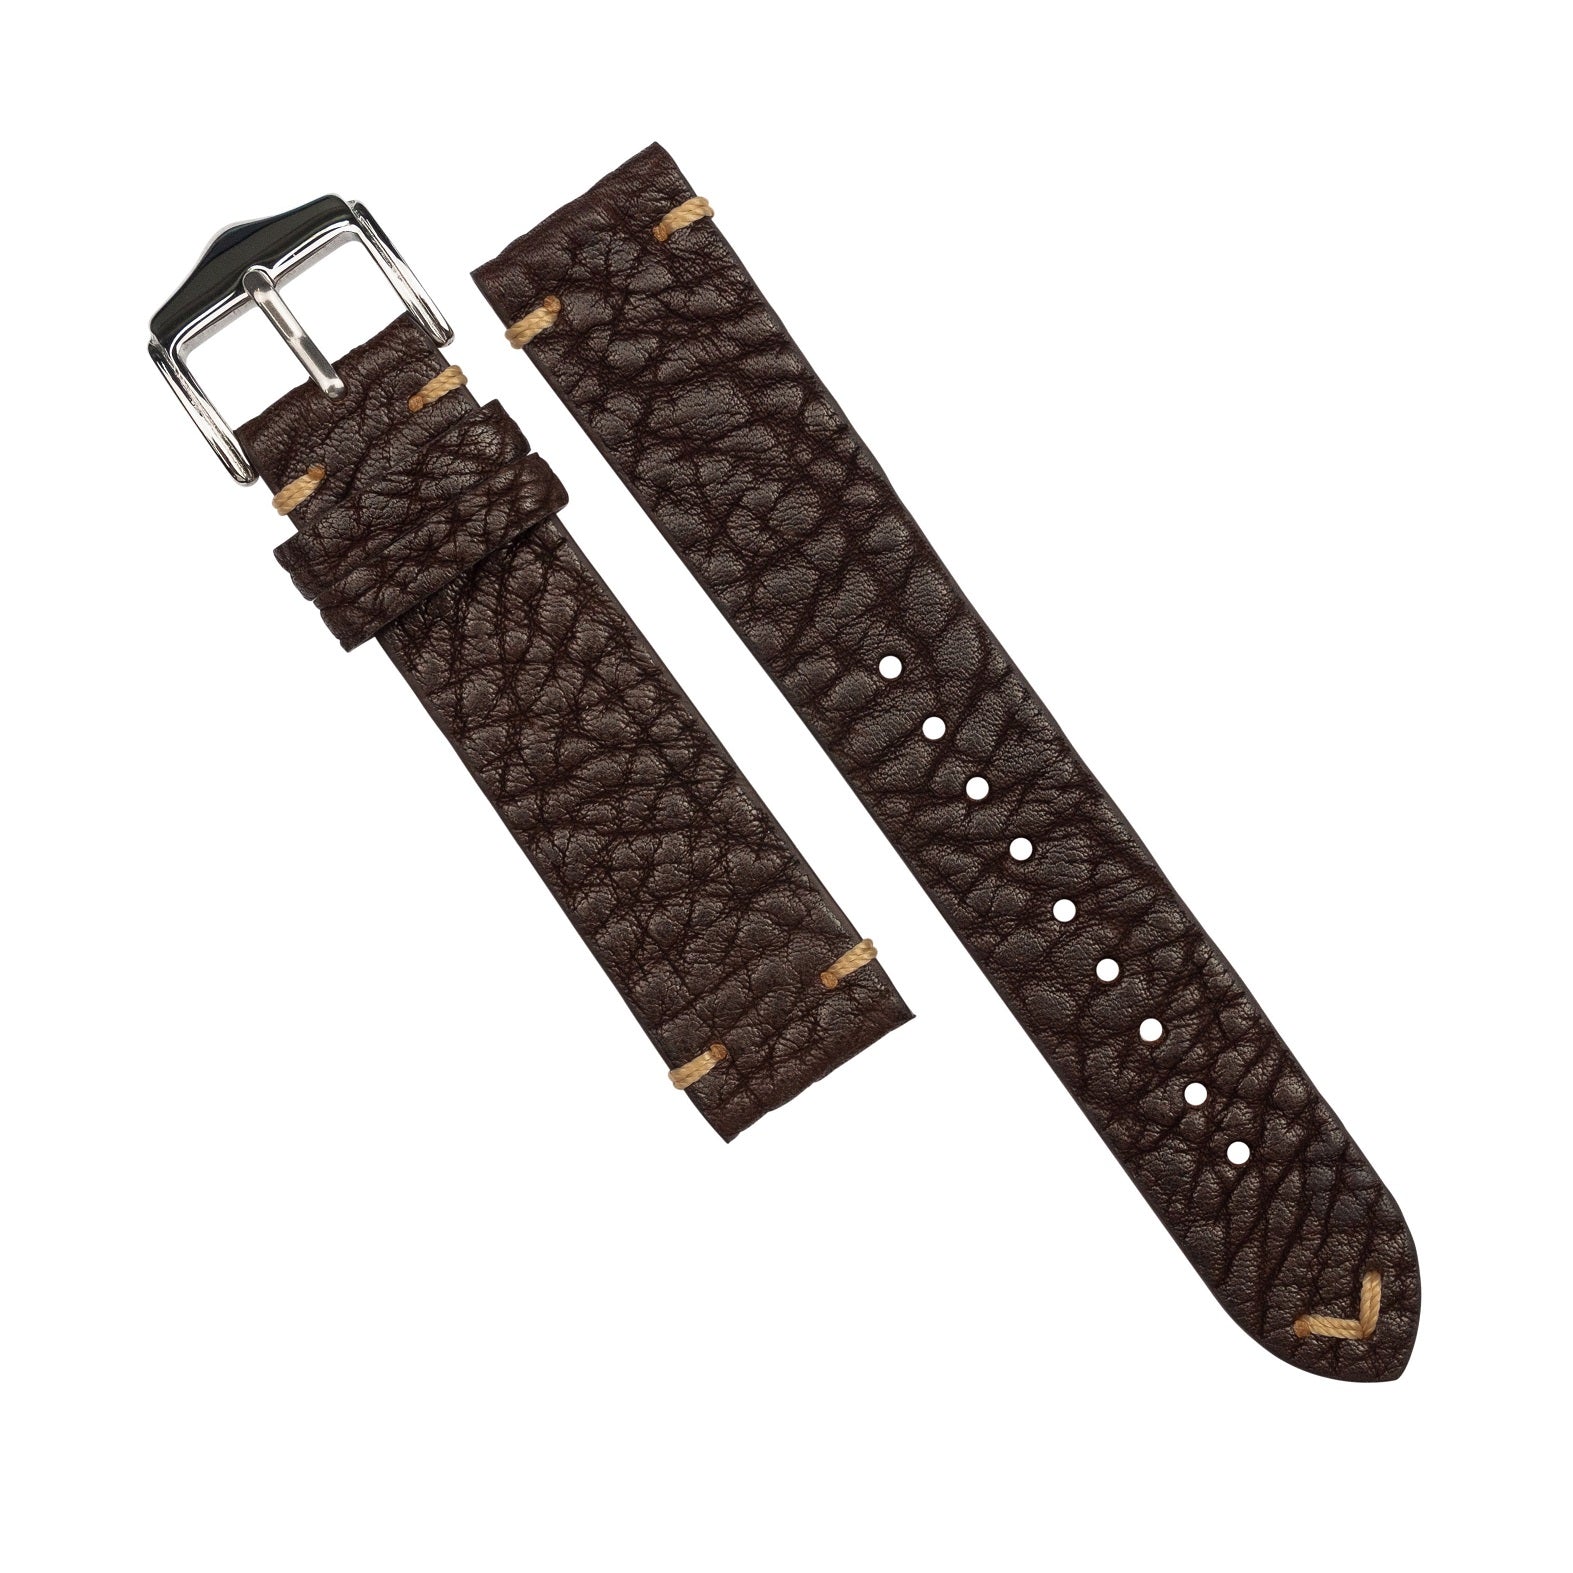 Premium Vintage Calf Leather Watch Strap in Distressed Brown (20mm) - Nomad Watch Works SG